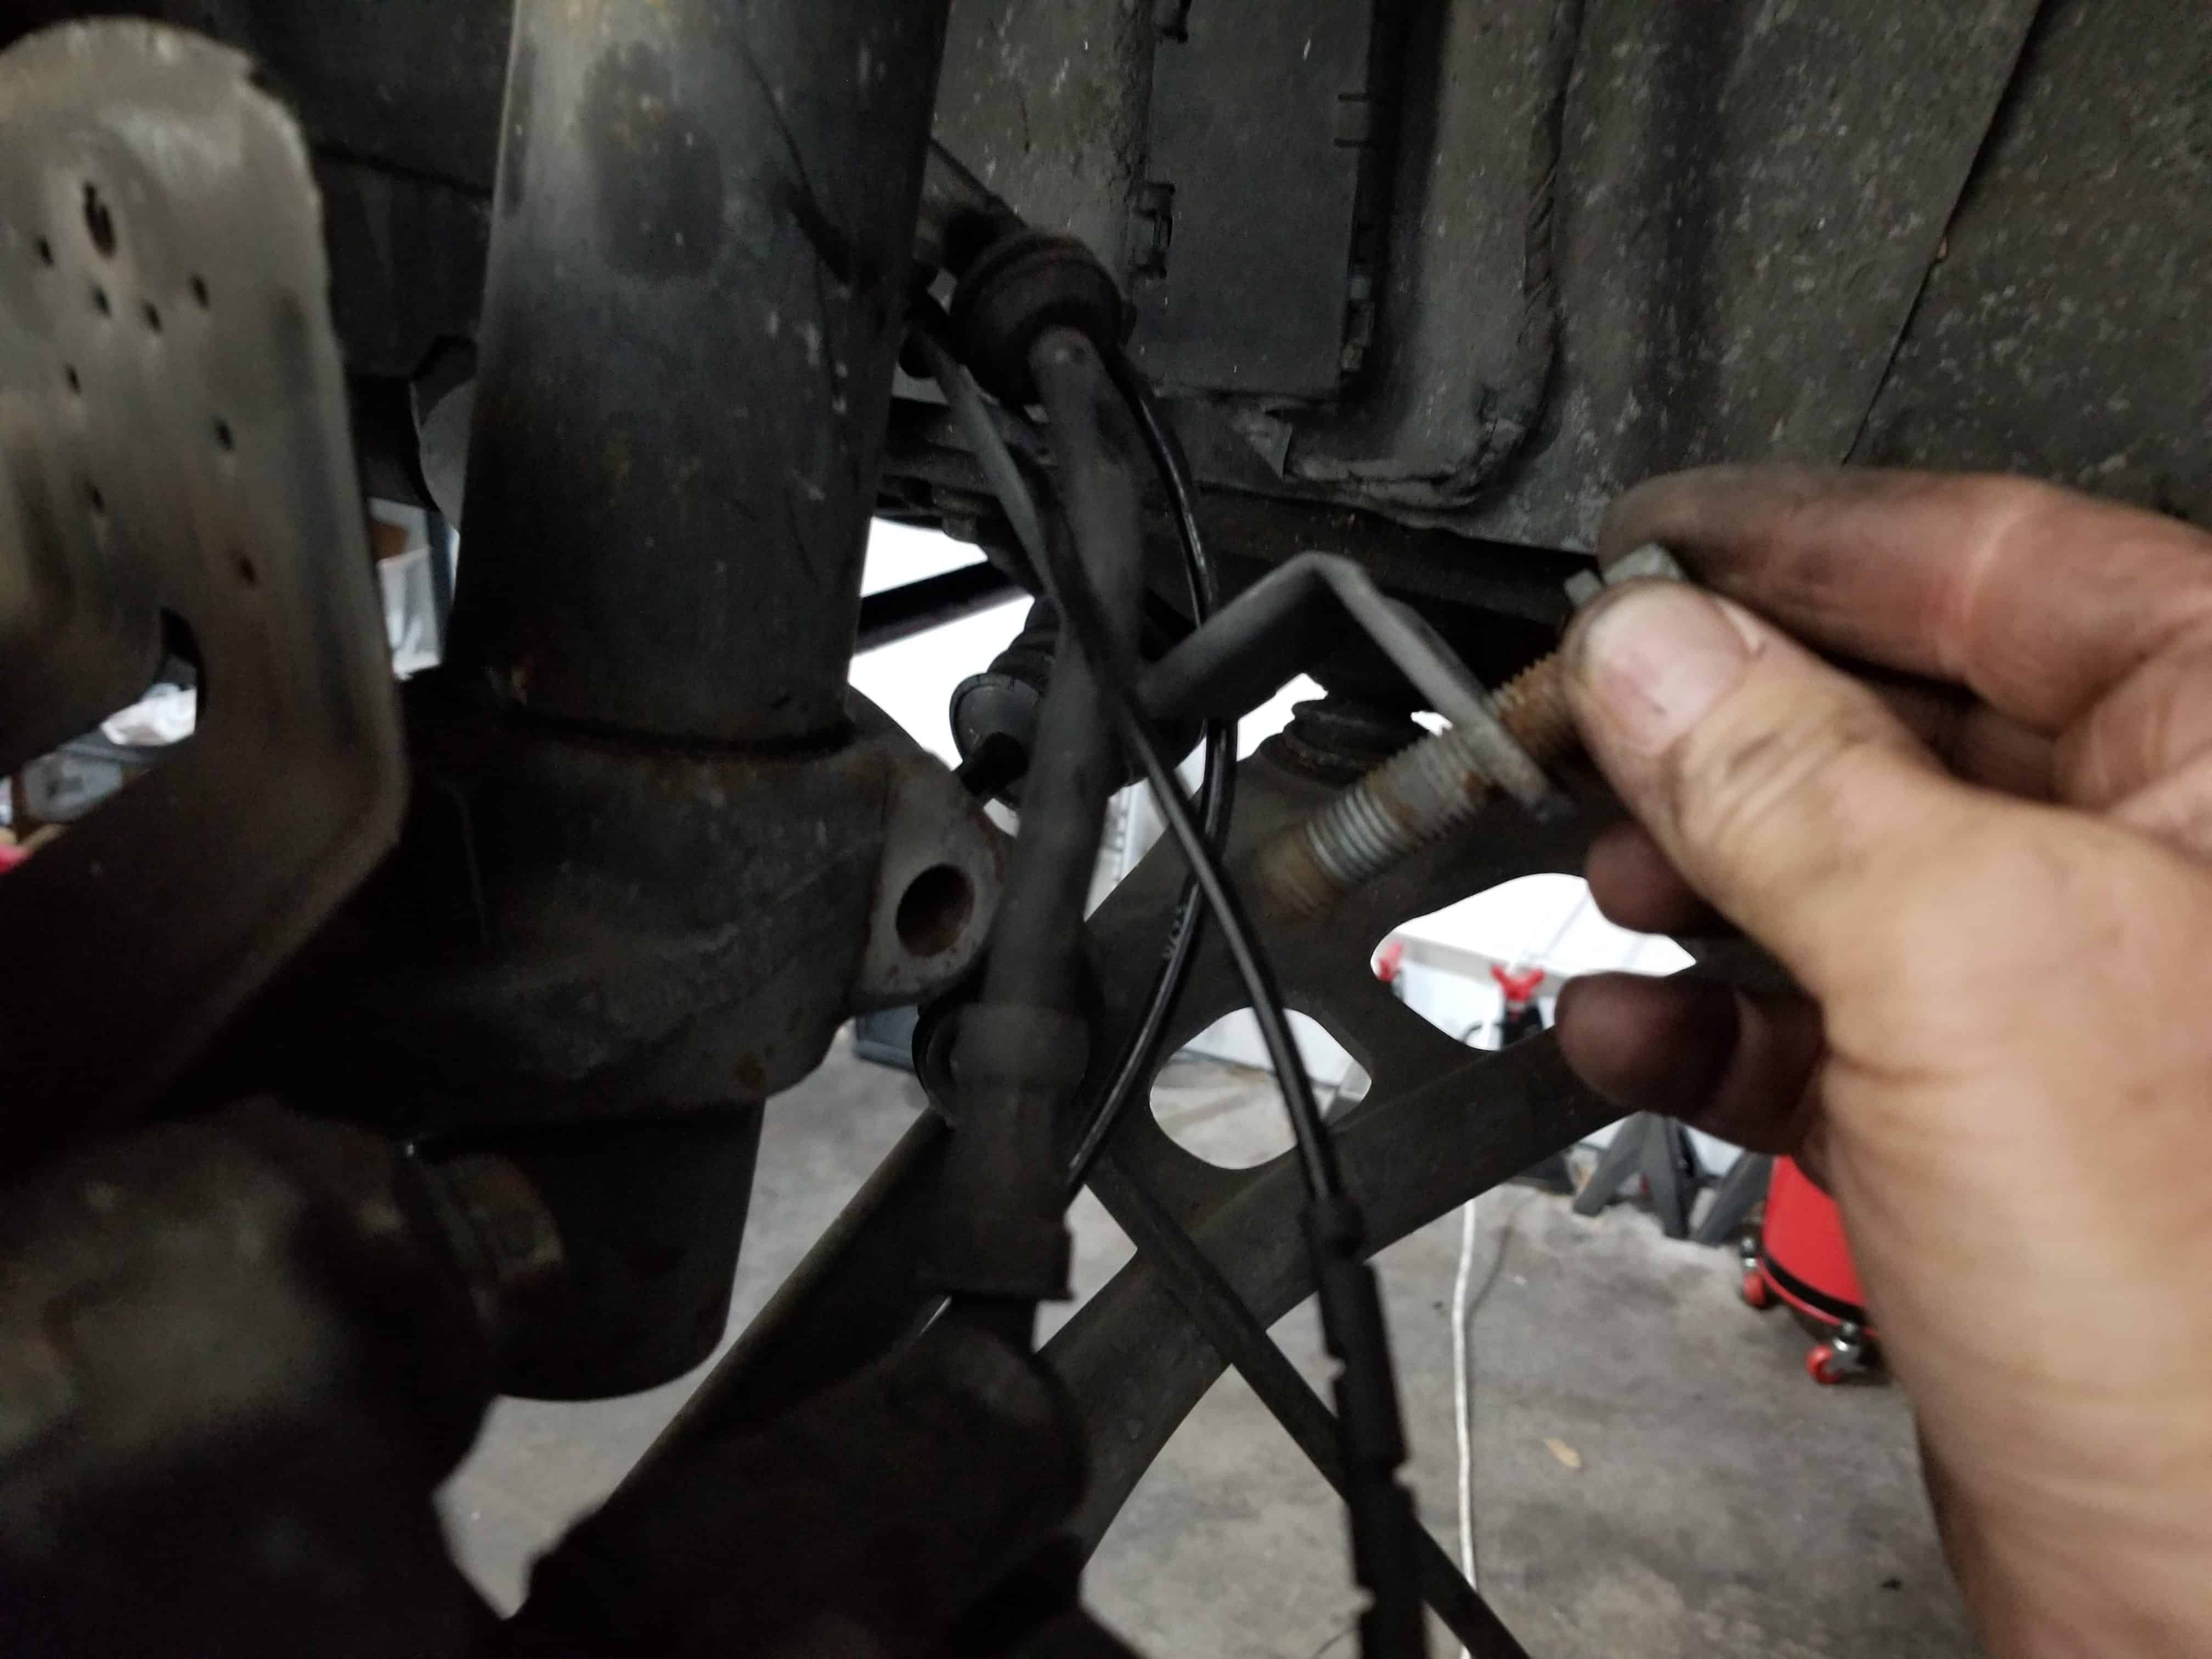 bmw e46 strut replacement - remove king pin anchor bolt